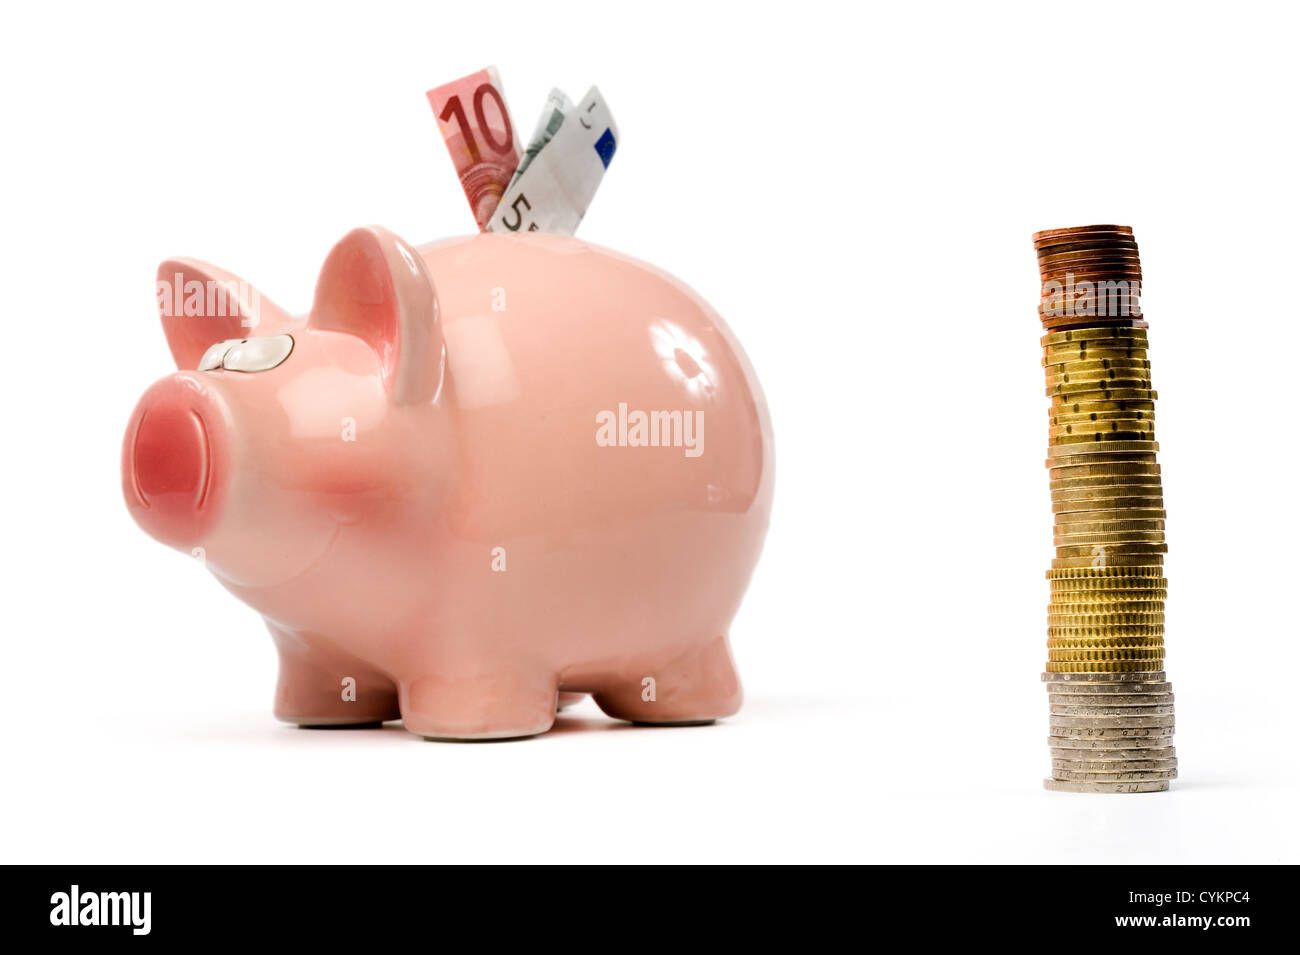 A saving pig with stapled euro coins in front Stock Photo